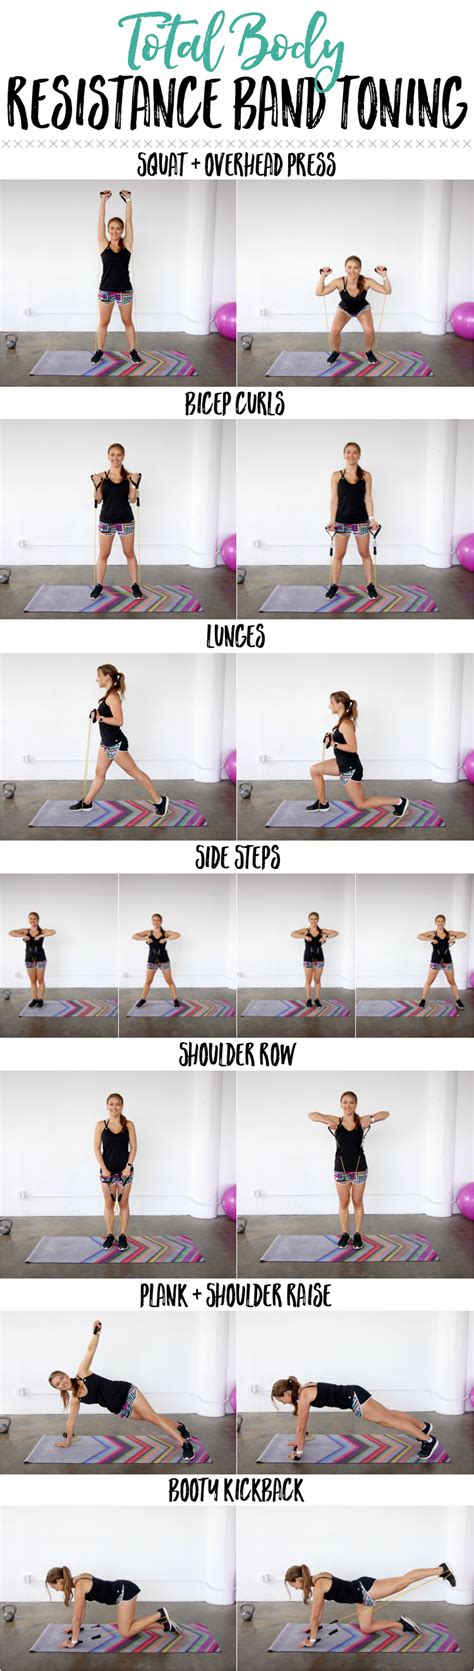 Begin in a side forearm plank with shoulders stacked over the elbow and resistance band around the thighs just about the knees. Total Body Resistance Band Toning • The Live Fit Girls